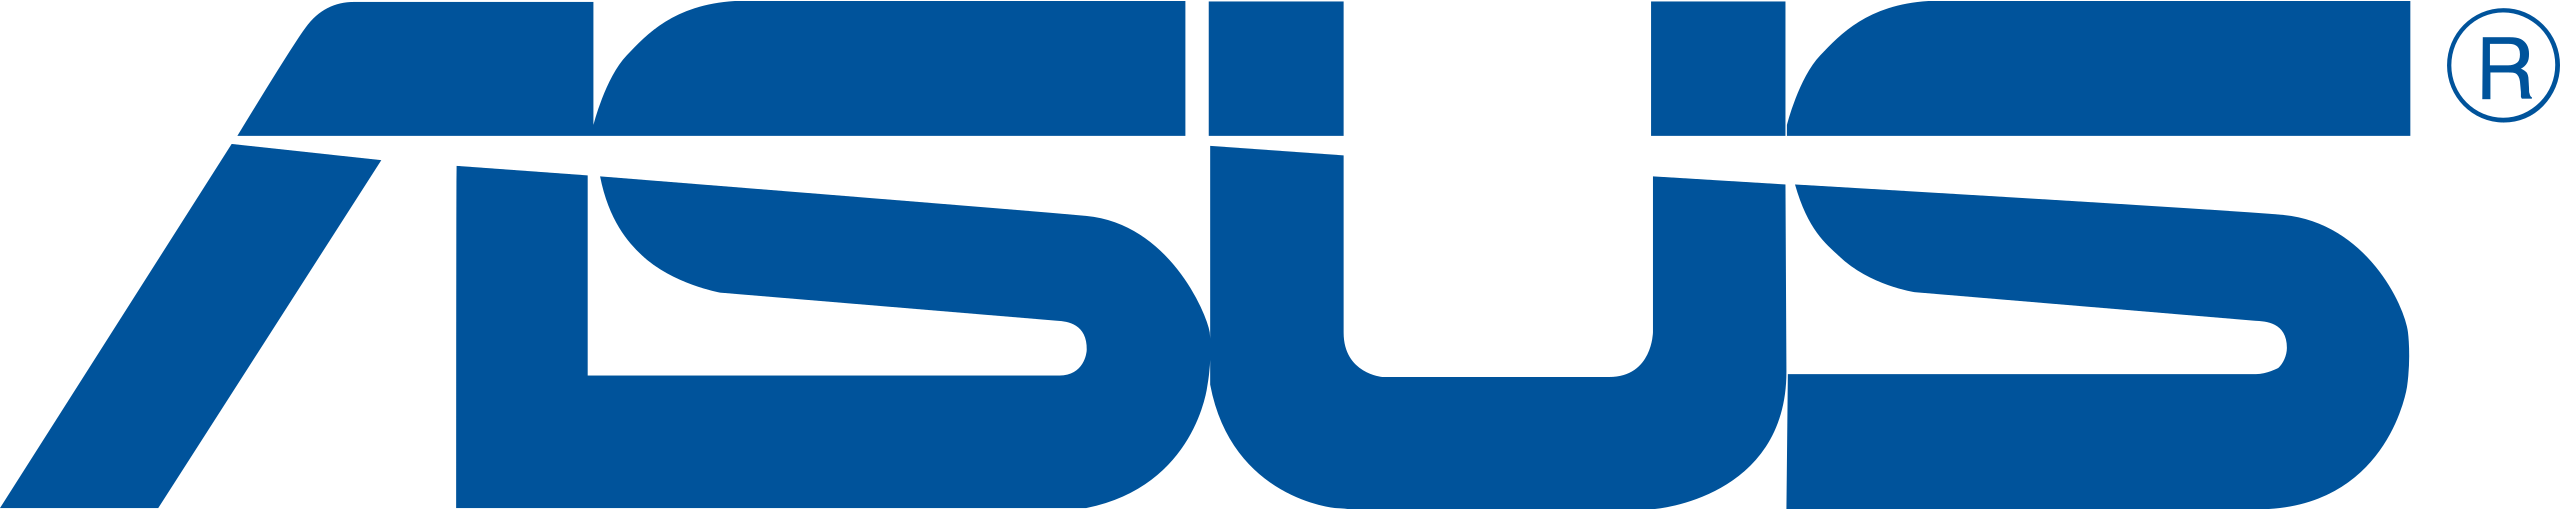 Asus Company Logo Blue Background PNG image